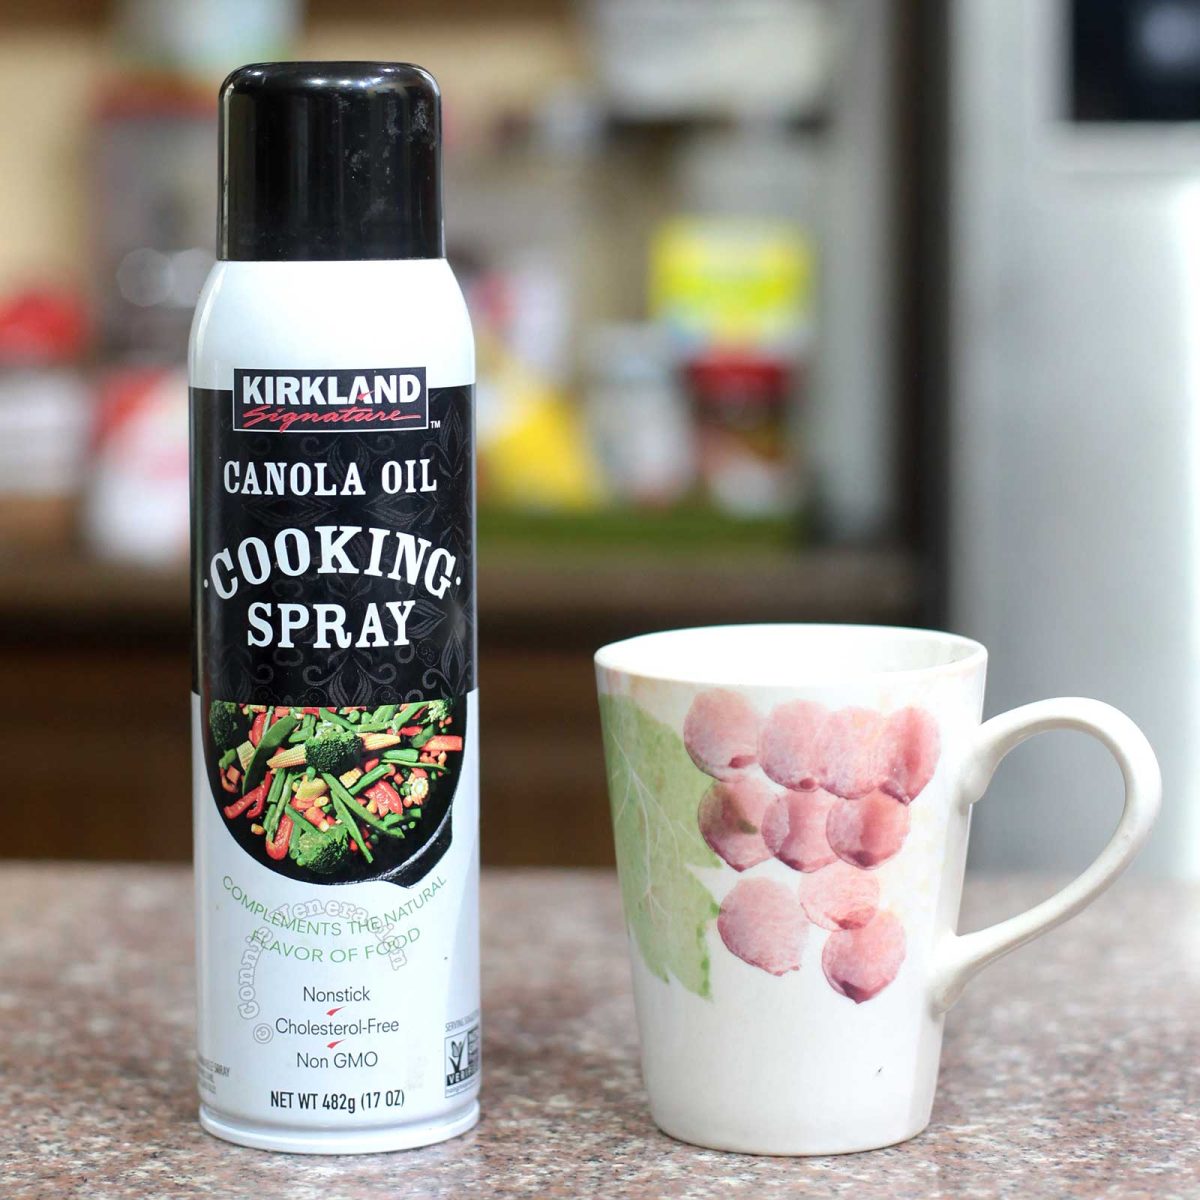 A canister of Kirkland cooking spray